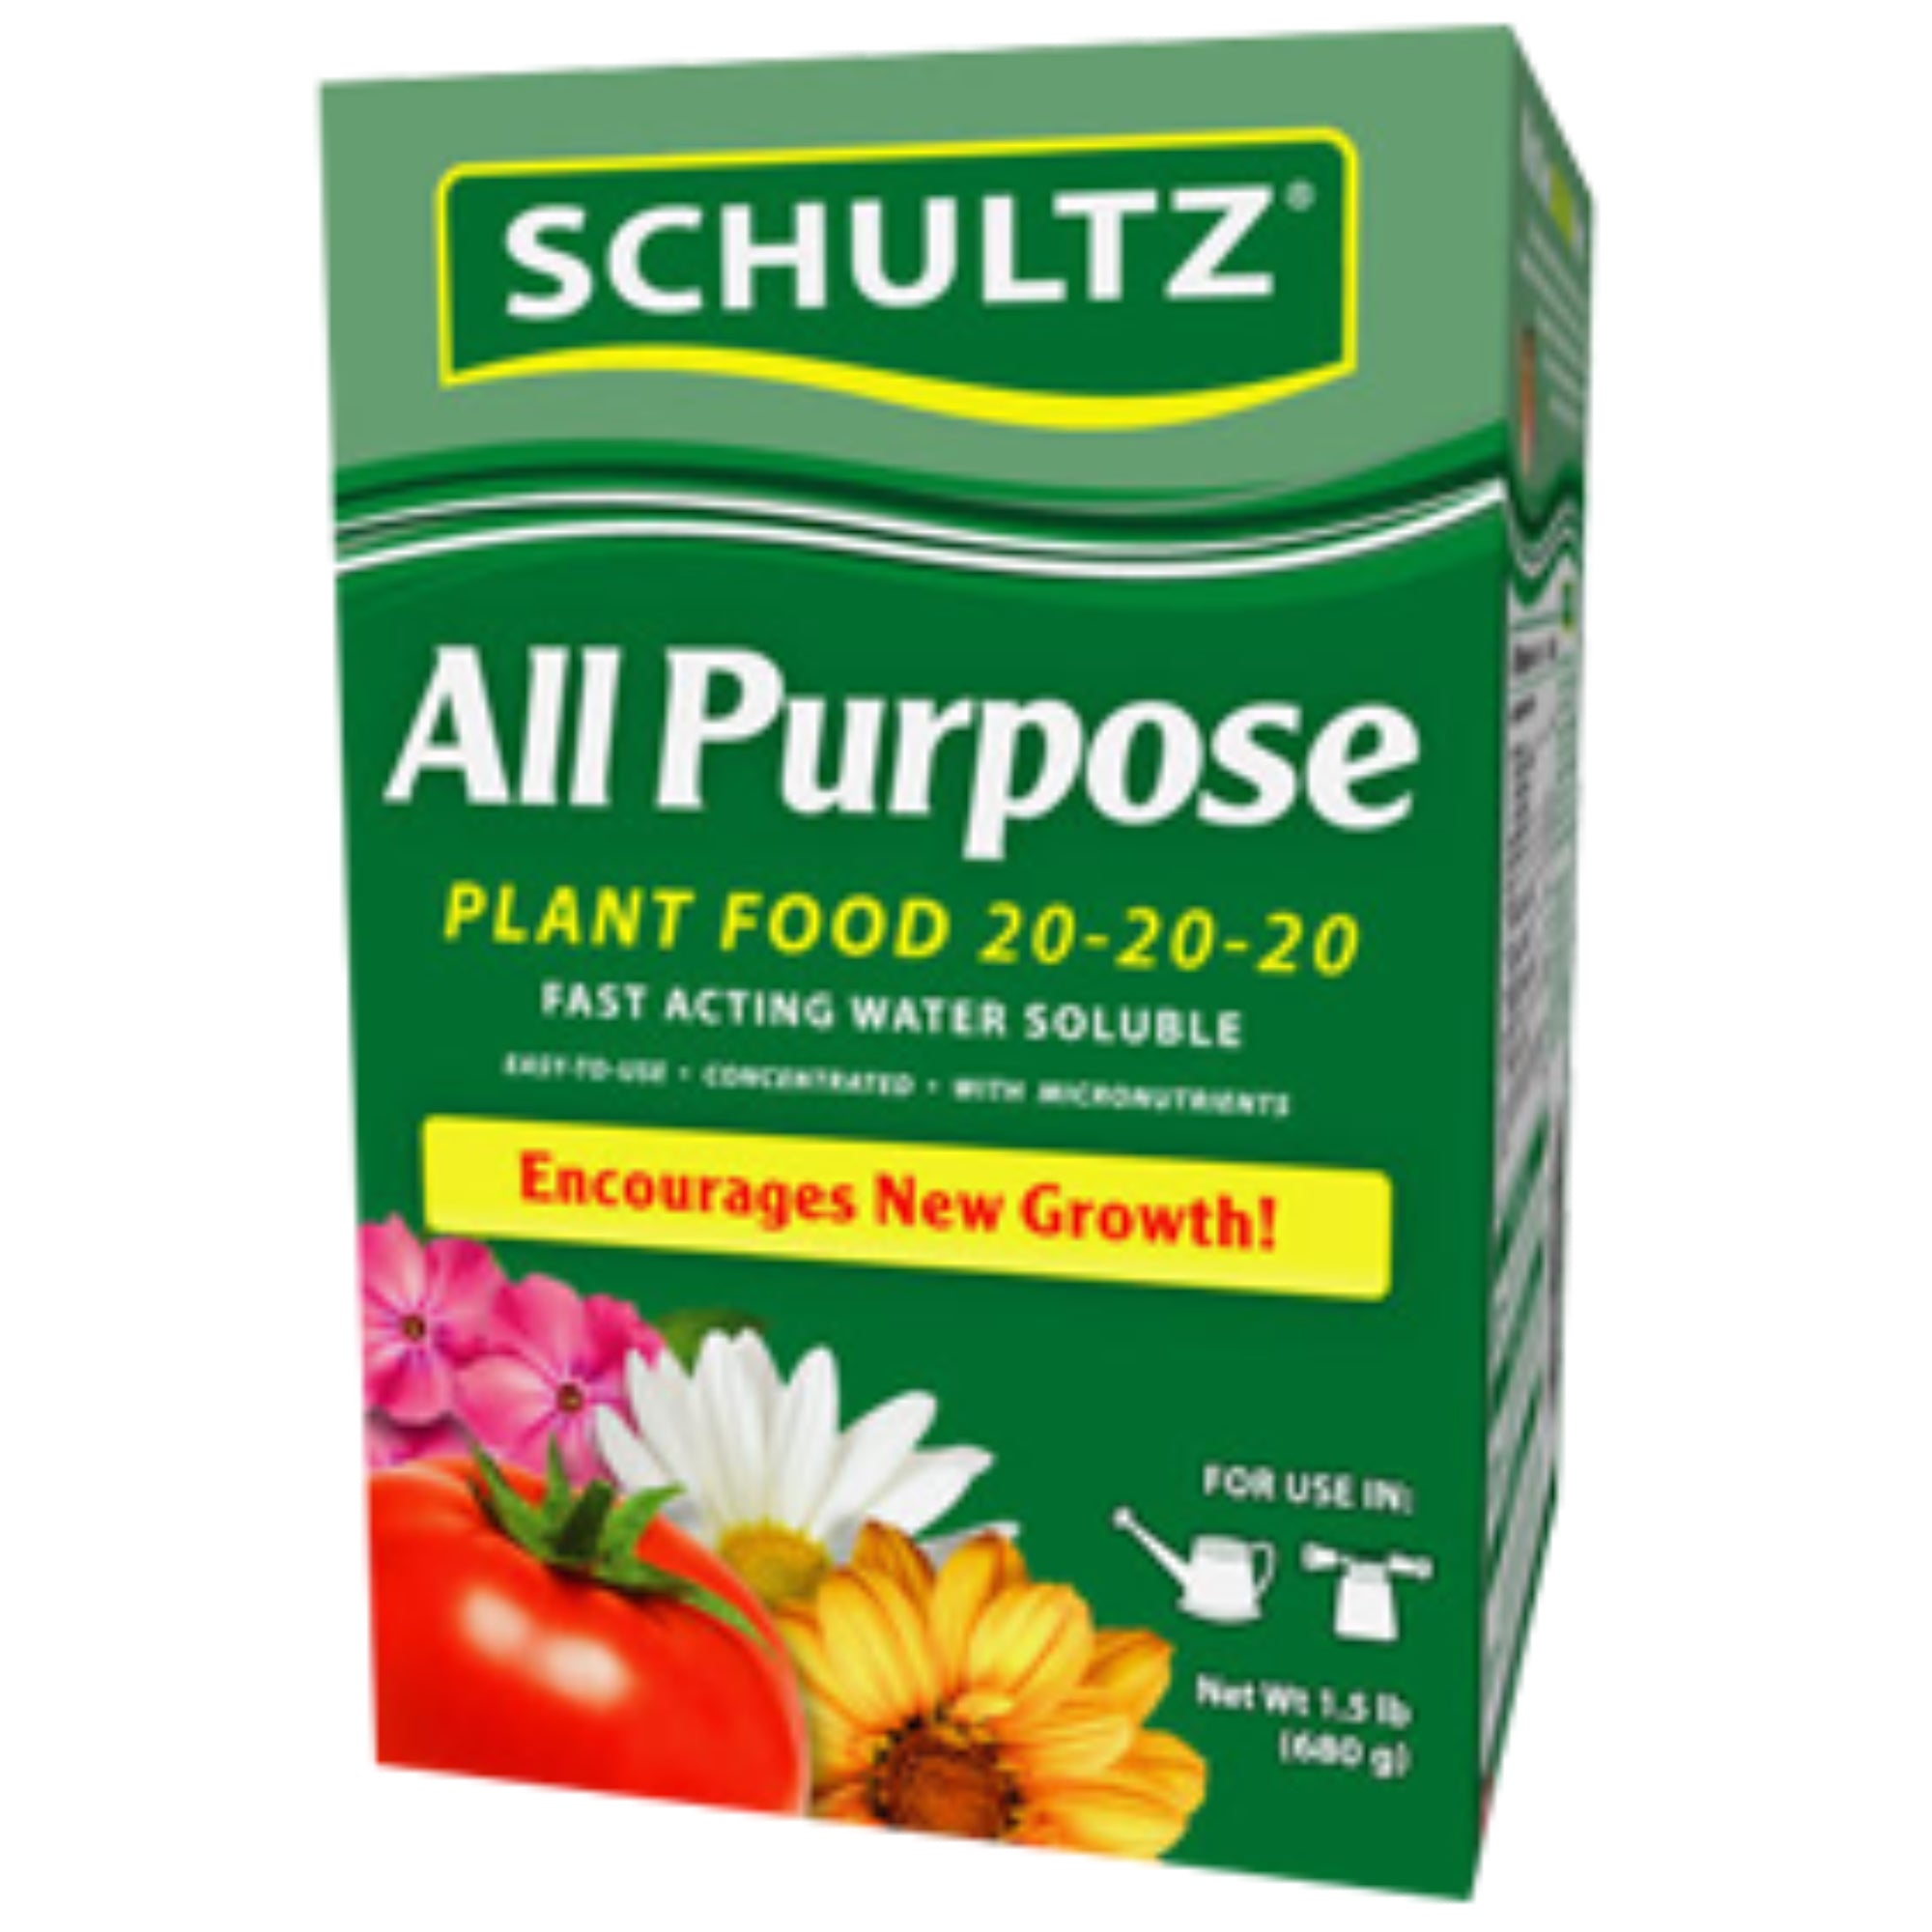 Schultz Fast Acting Water Soluble All Purpose Plant Food, 1.5lb